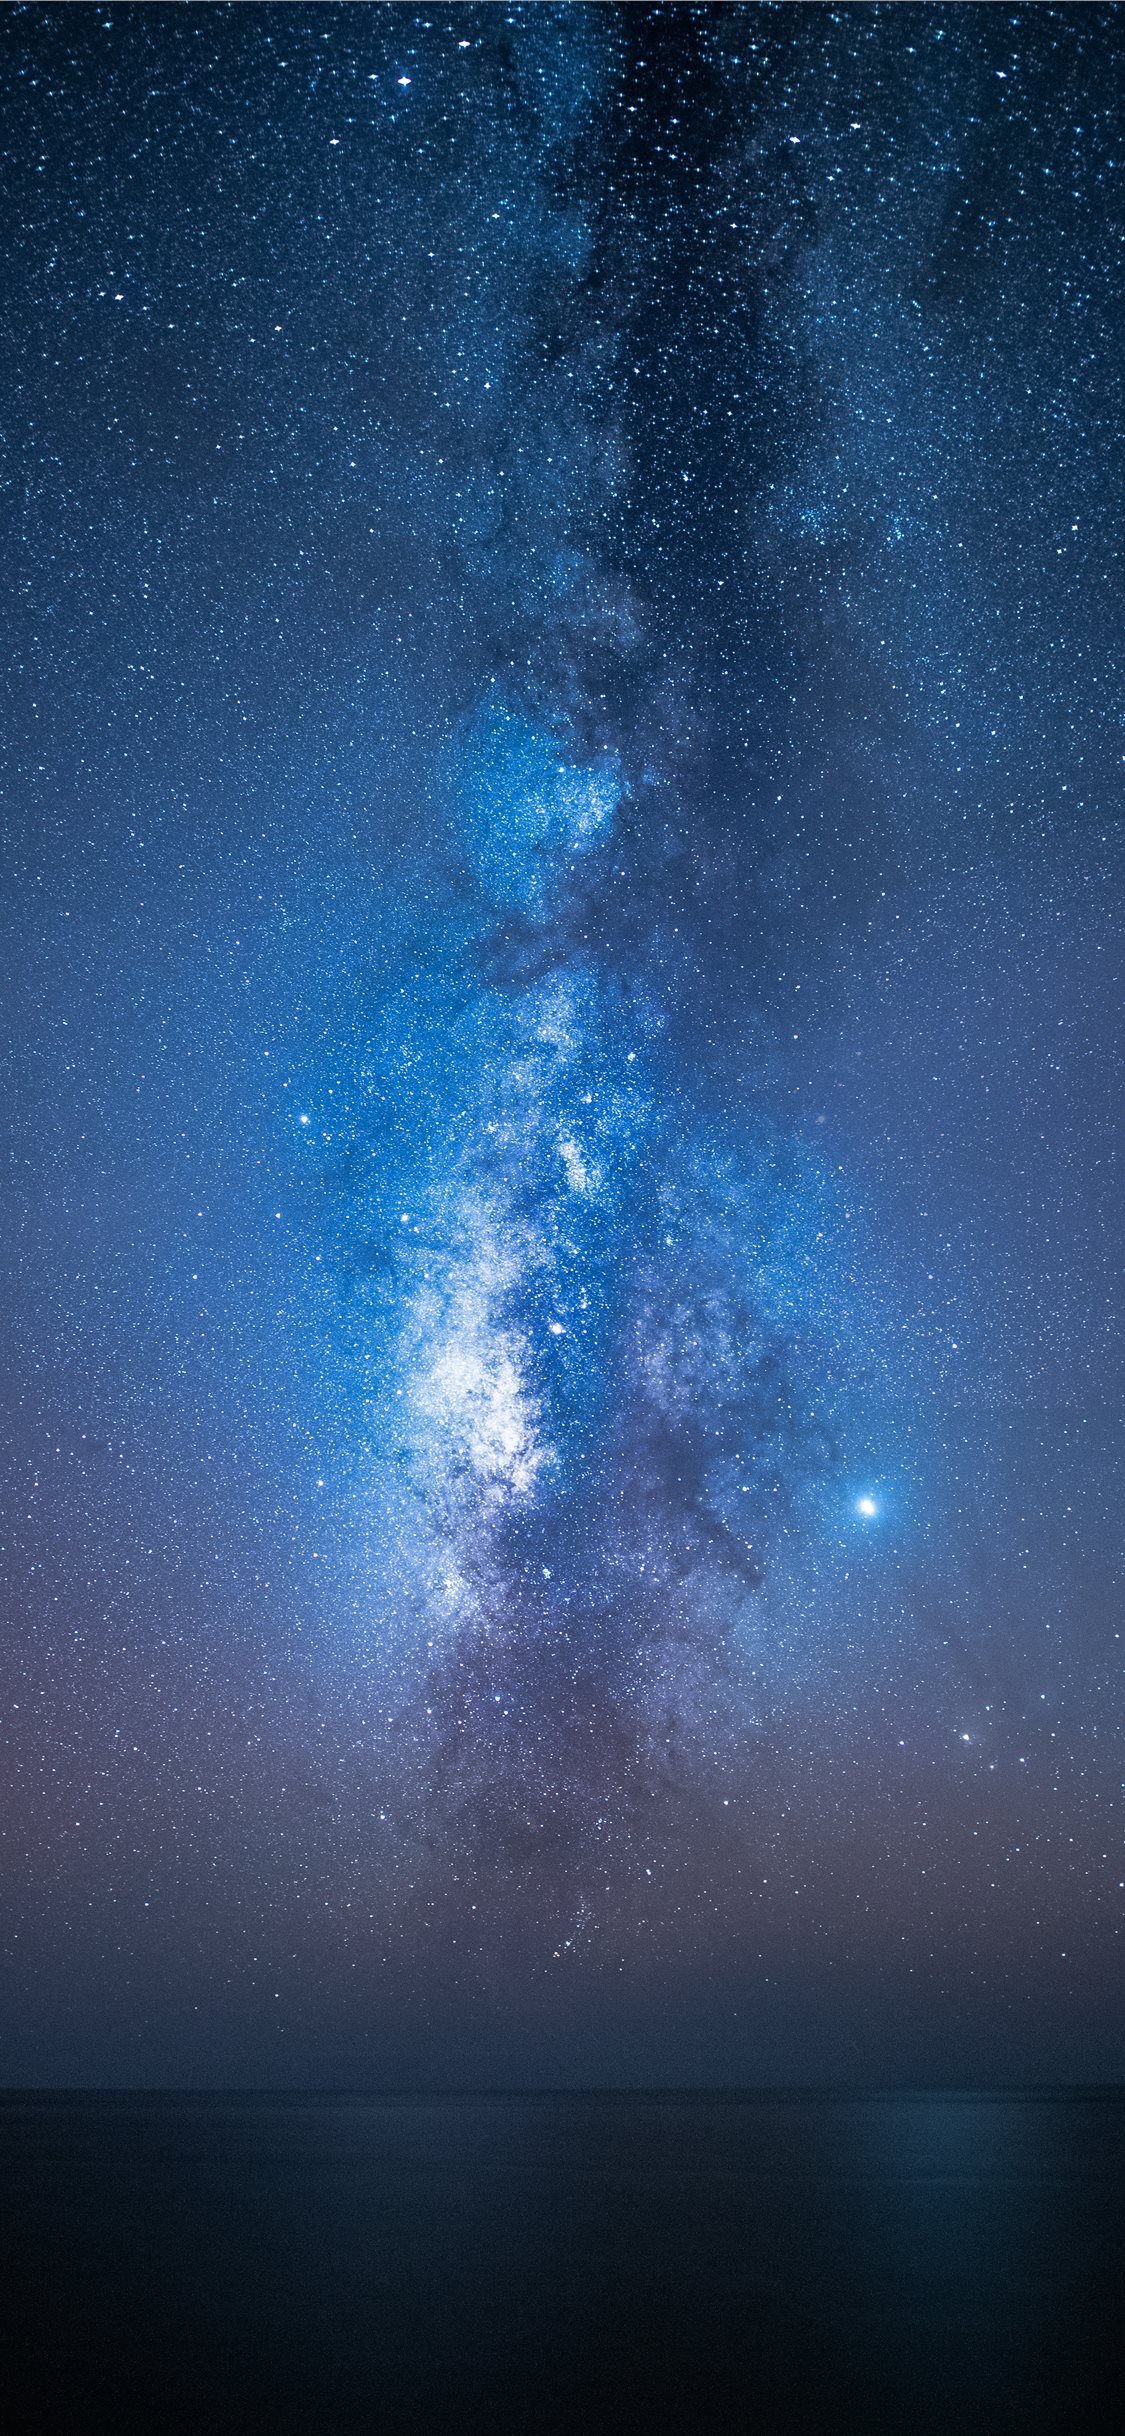 The Of Milkyway Wallpaper Beaty Your iPhone